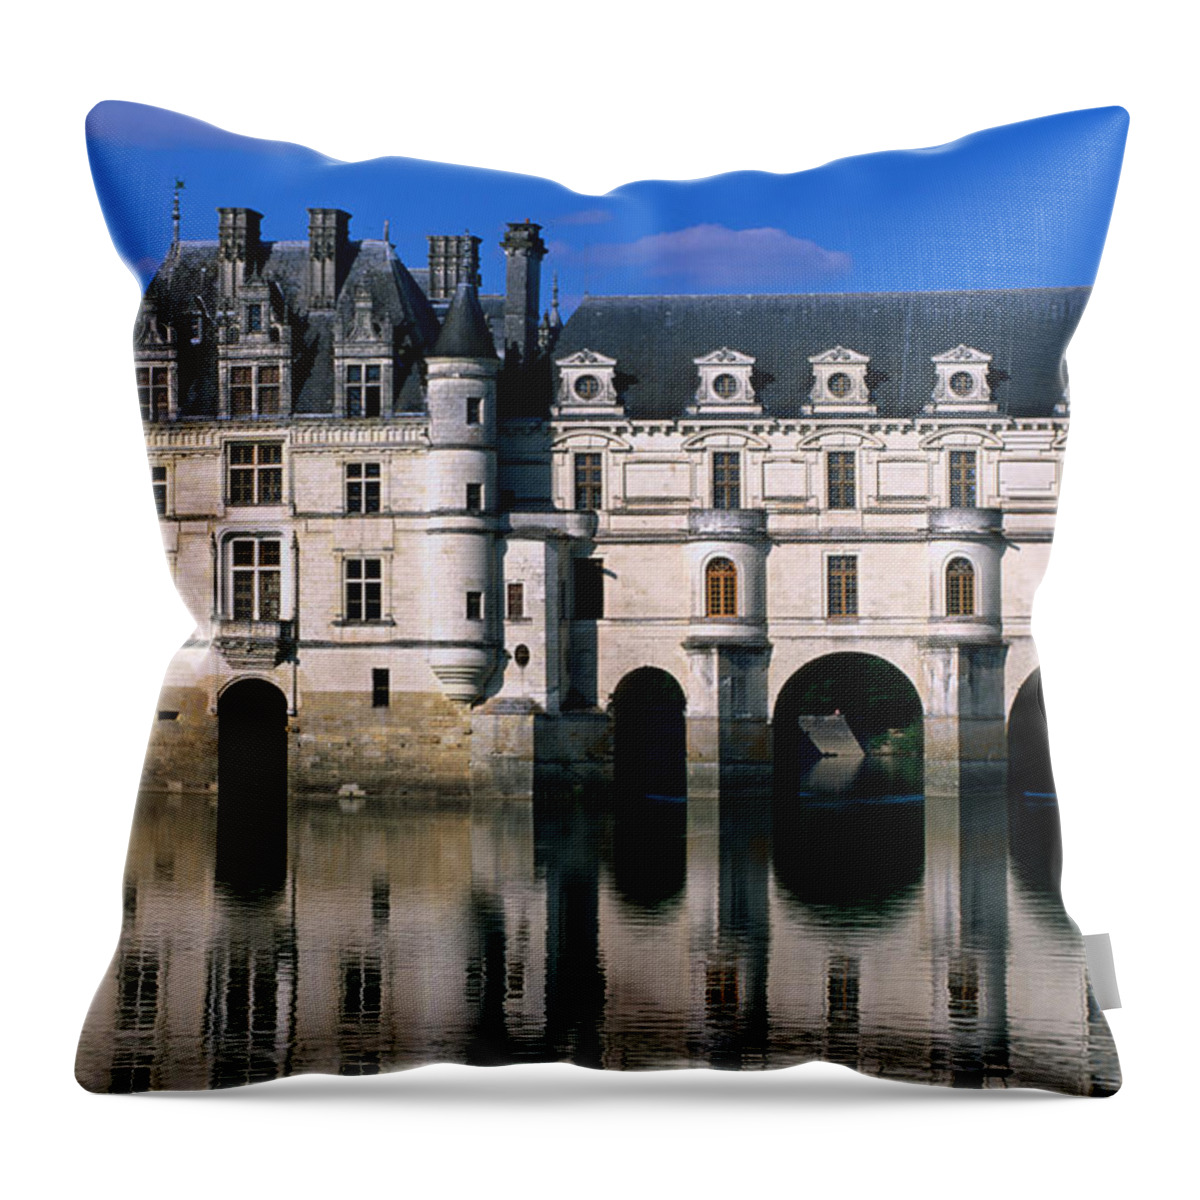 Arch Throw Pillow featuring the photograph Chateau De Chenonceau Along Cher River by John Elk Iii